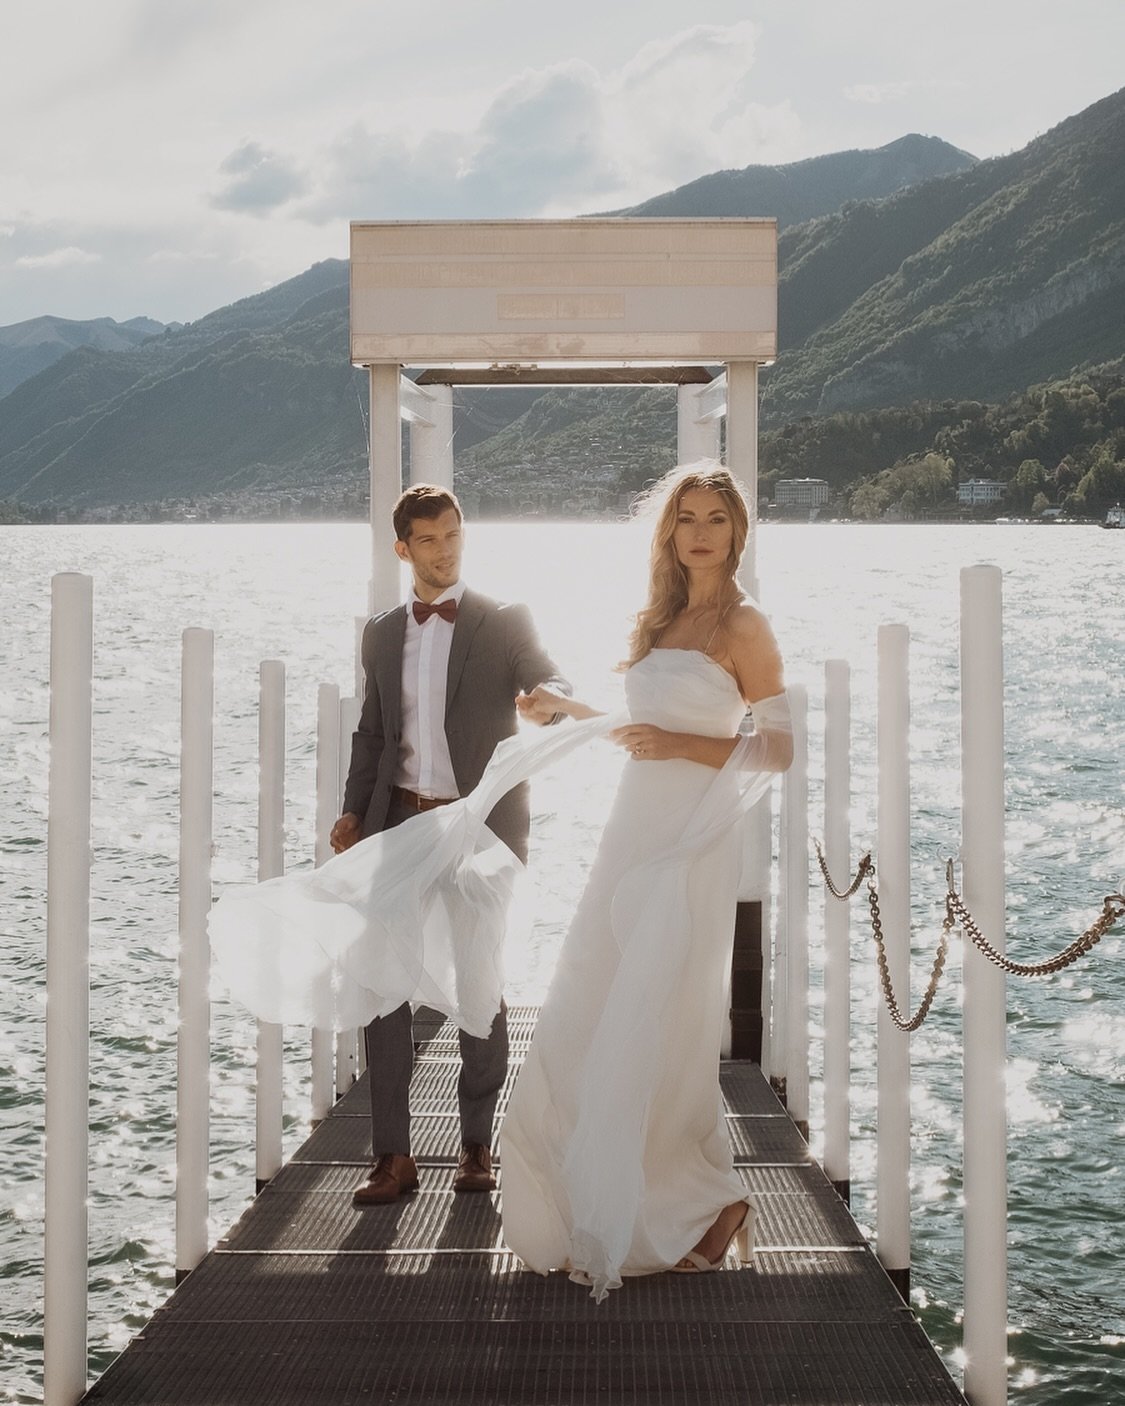 Como, amore nostro &bull;

Sneak peak from yesterday&rsquo;s photoshoot with Davide and Pola.
@otaduy dress was the perfect fit for such an elegant location.
We could keep coming to the Lake over and over again (and we will!).
More to come